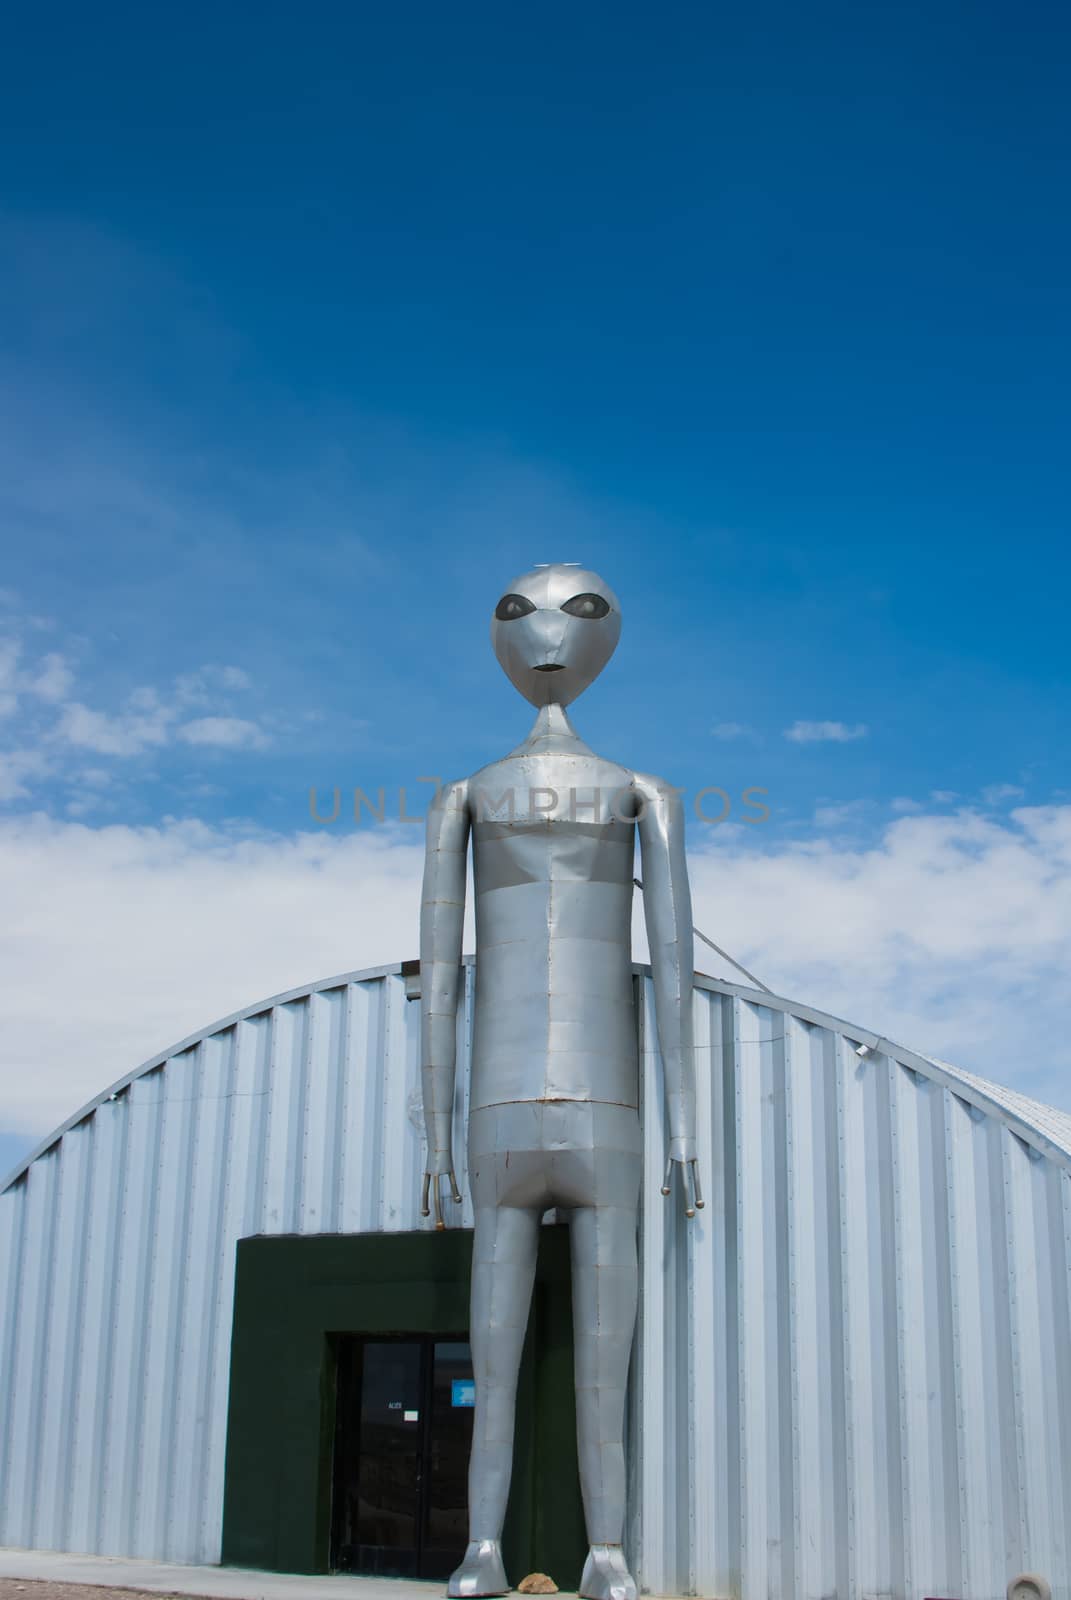 RACHEL, NEVADA/USA – March 30, 2010: The tall metal Alien figure at the Alien Research Center located on Nevada's Extraterrestrial Highway near Area 51.